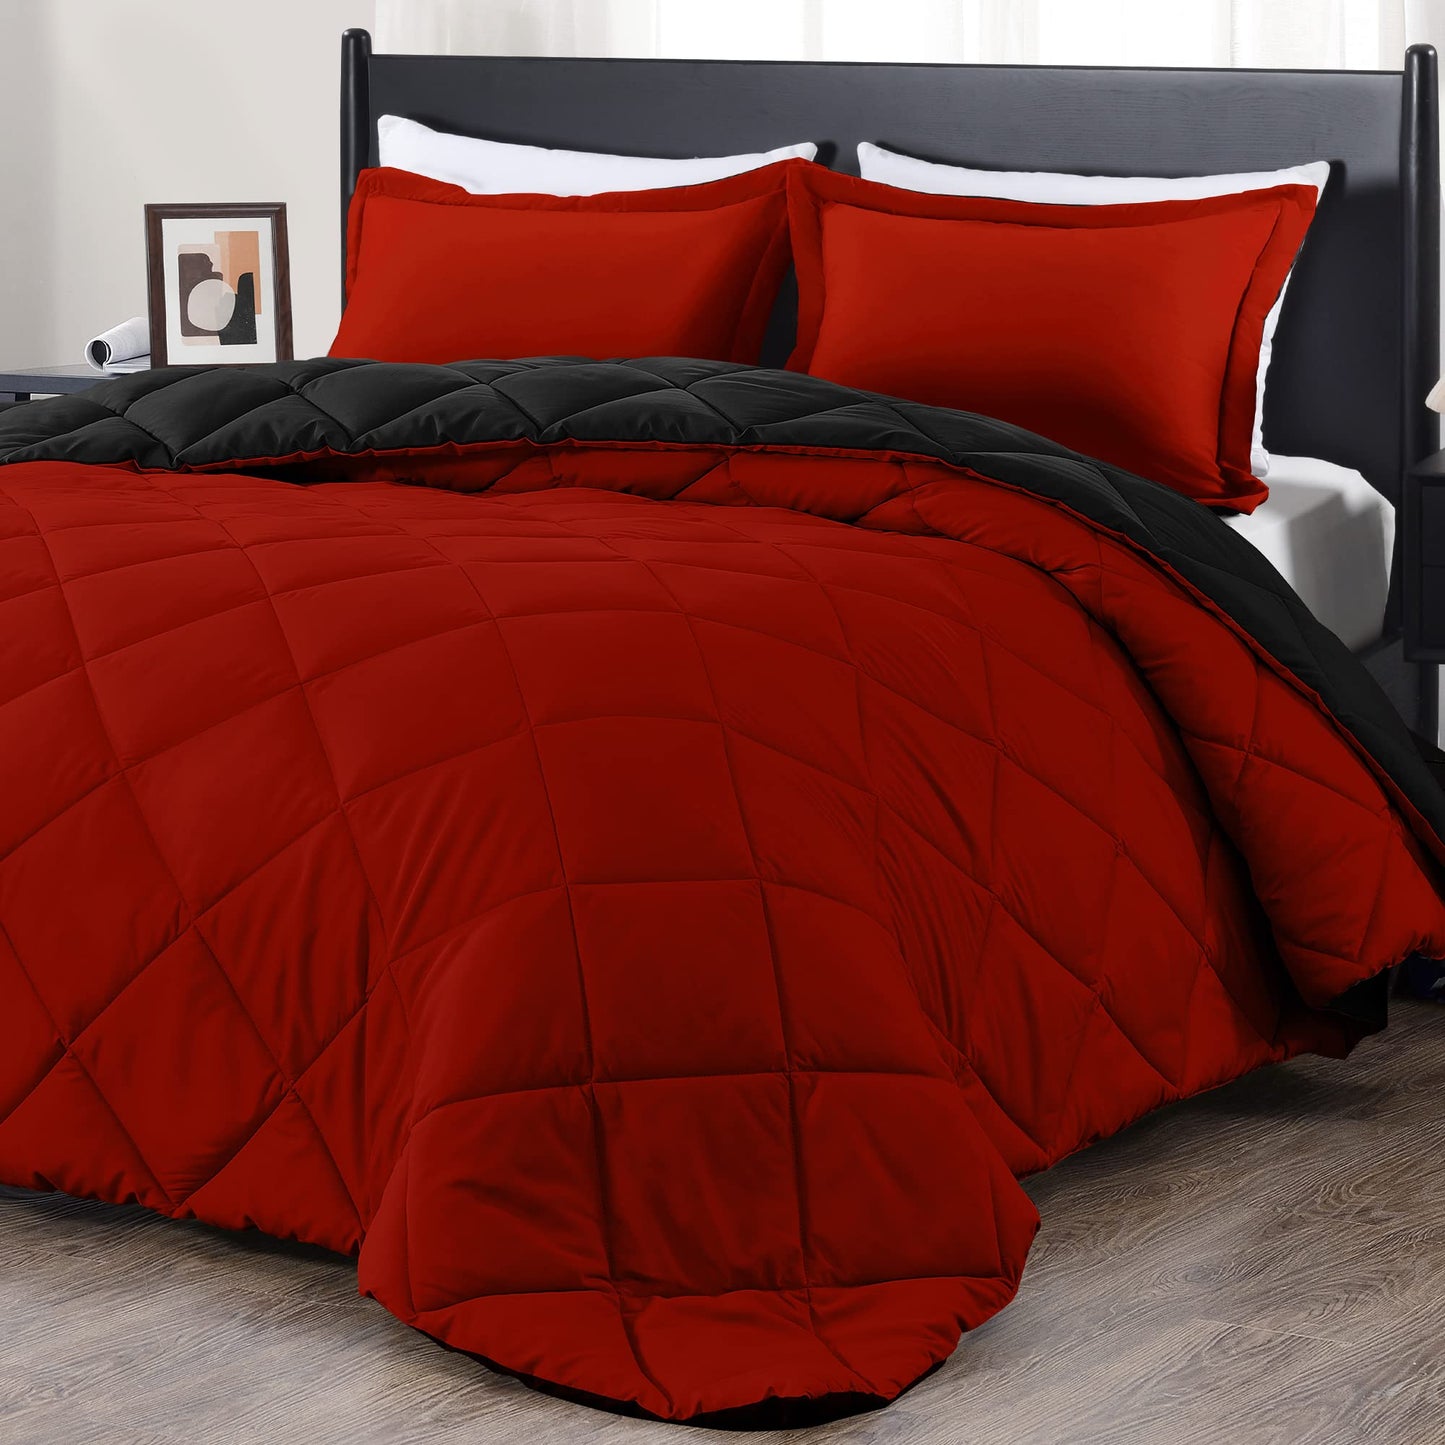 downluxe King Size Comforter Set - Red and Black King Comforter, Soft Bedding Sets for All Seasons - 3 Pieces - 1 Comforter (104"x92") and 2 Pillow Shams(20"x36")